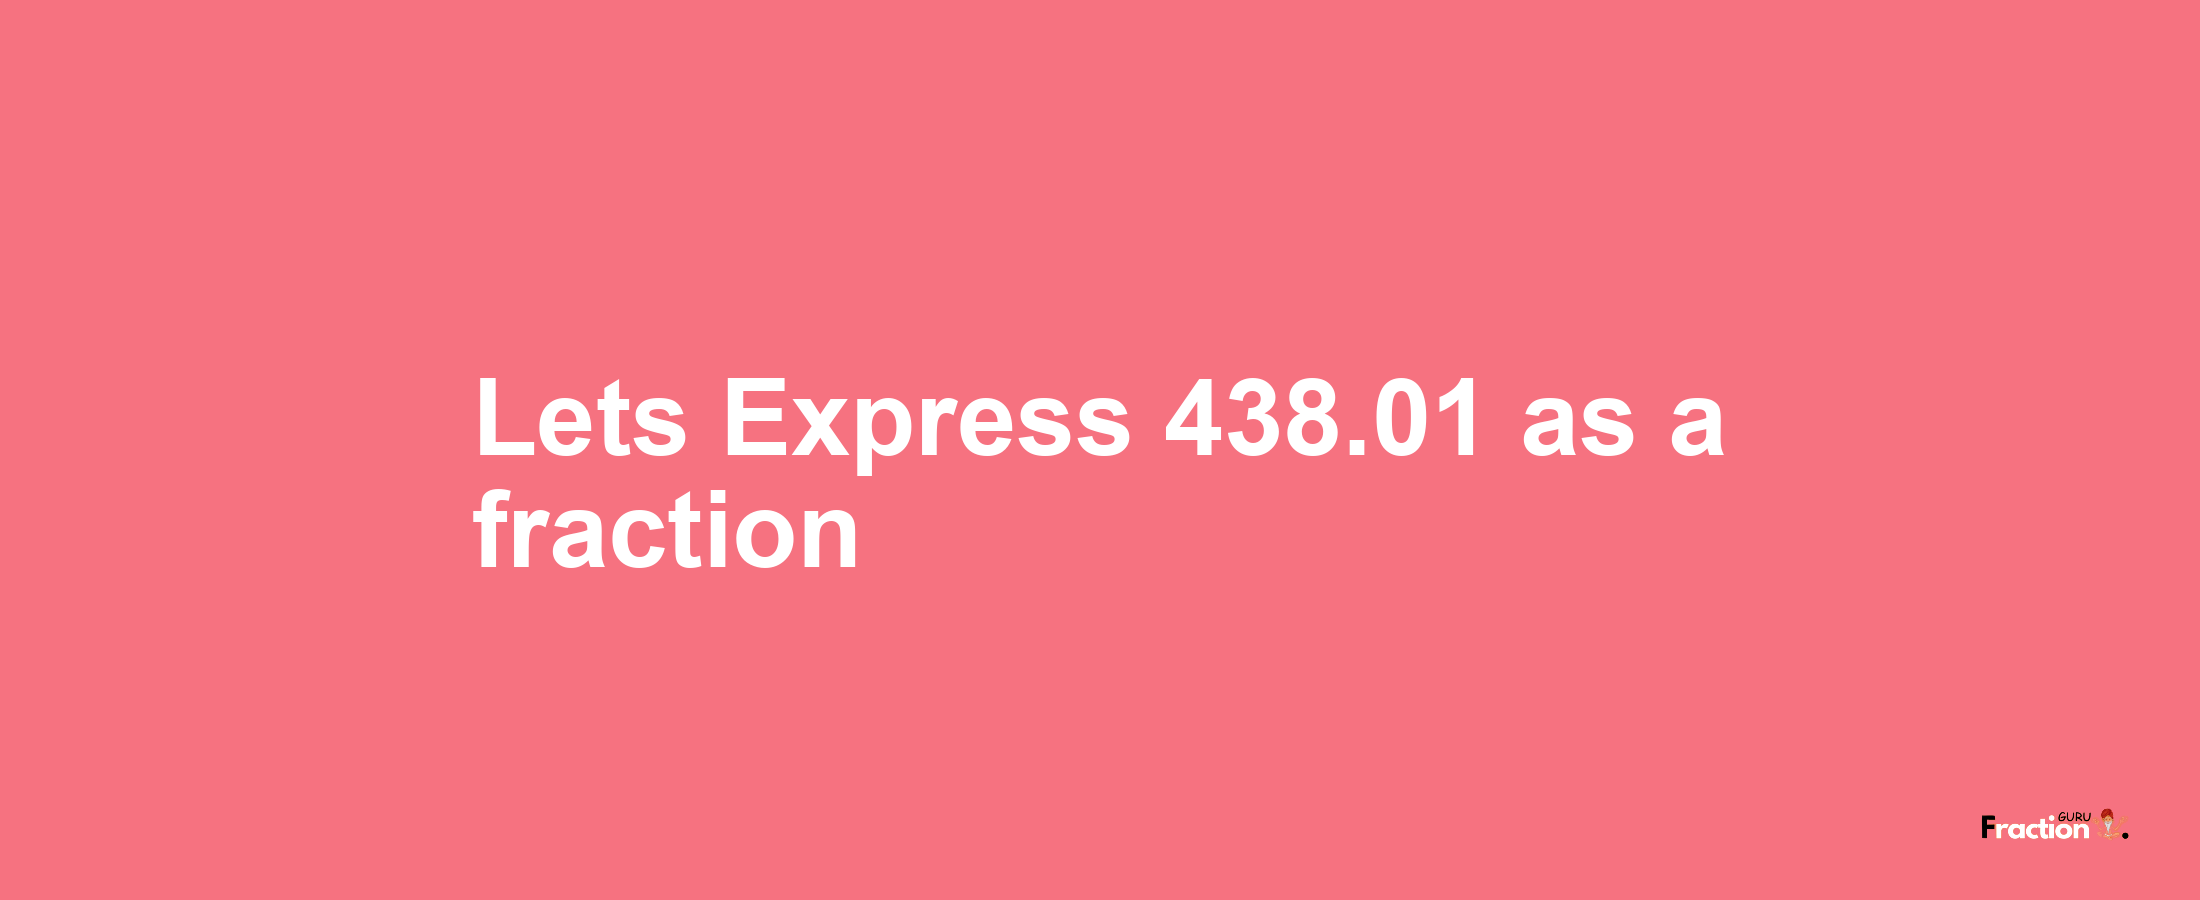 Lets Express 438.01 as afraction